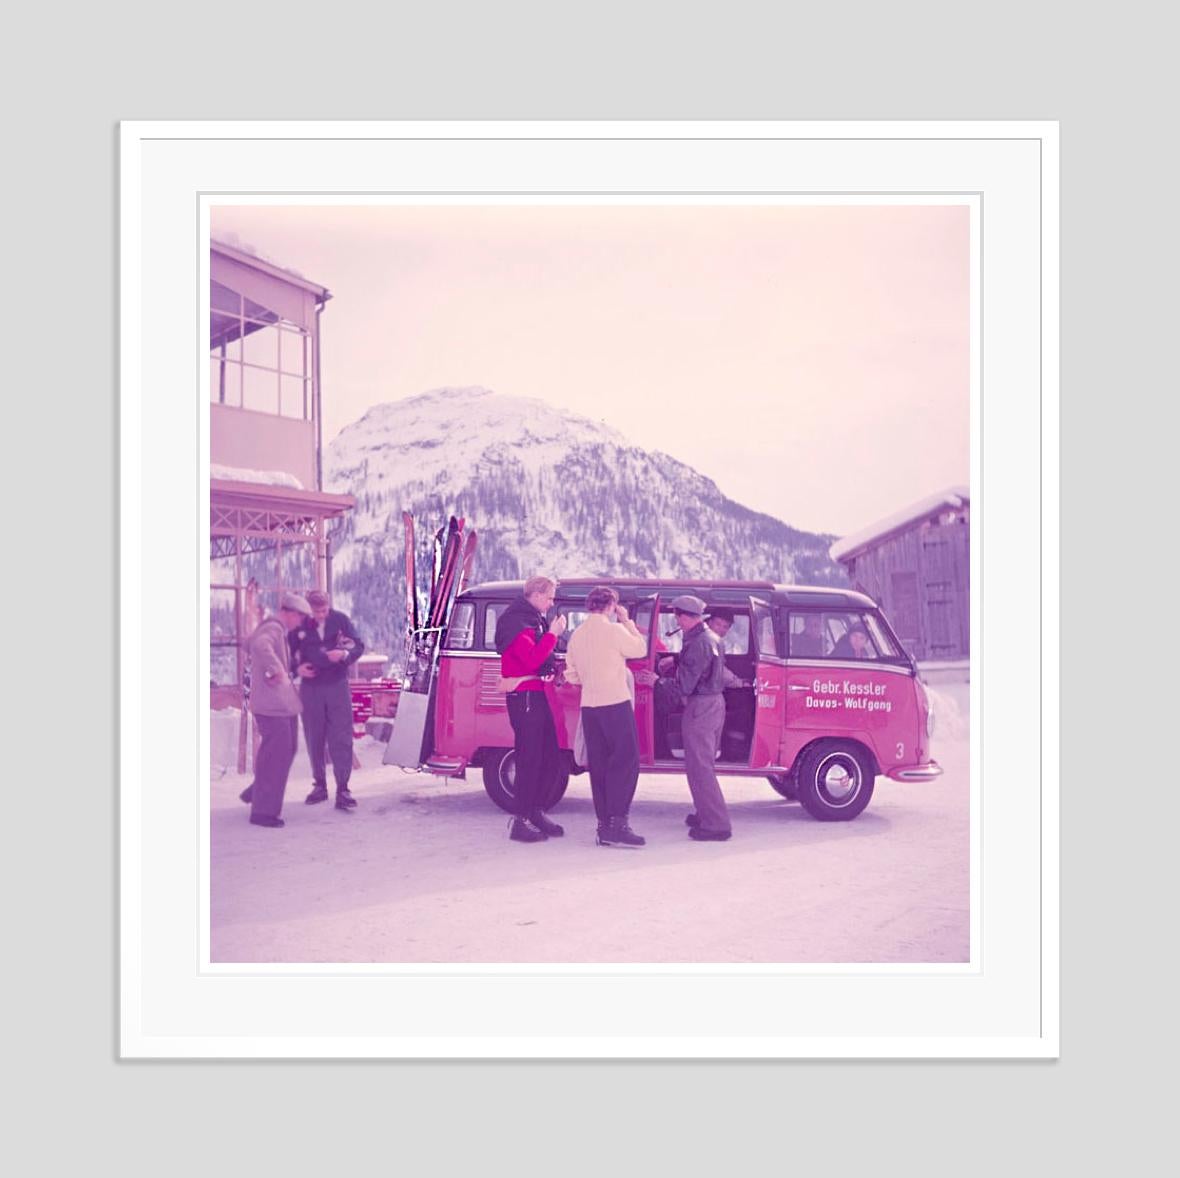  Ski Bus 1954 Oversize Limited Signature Stamped Edition  - Modern Photograph by Toni Frissell